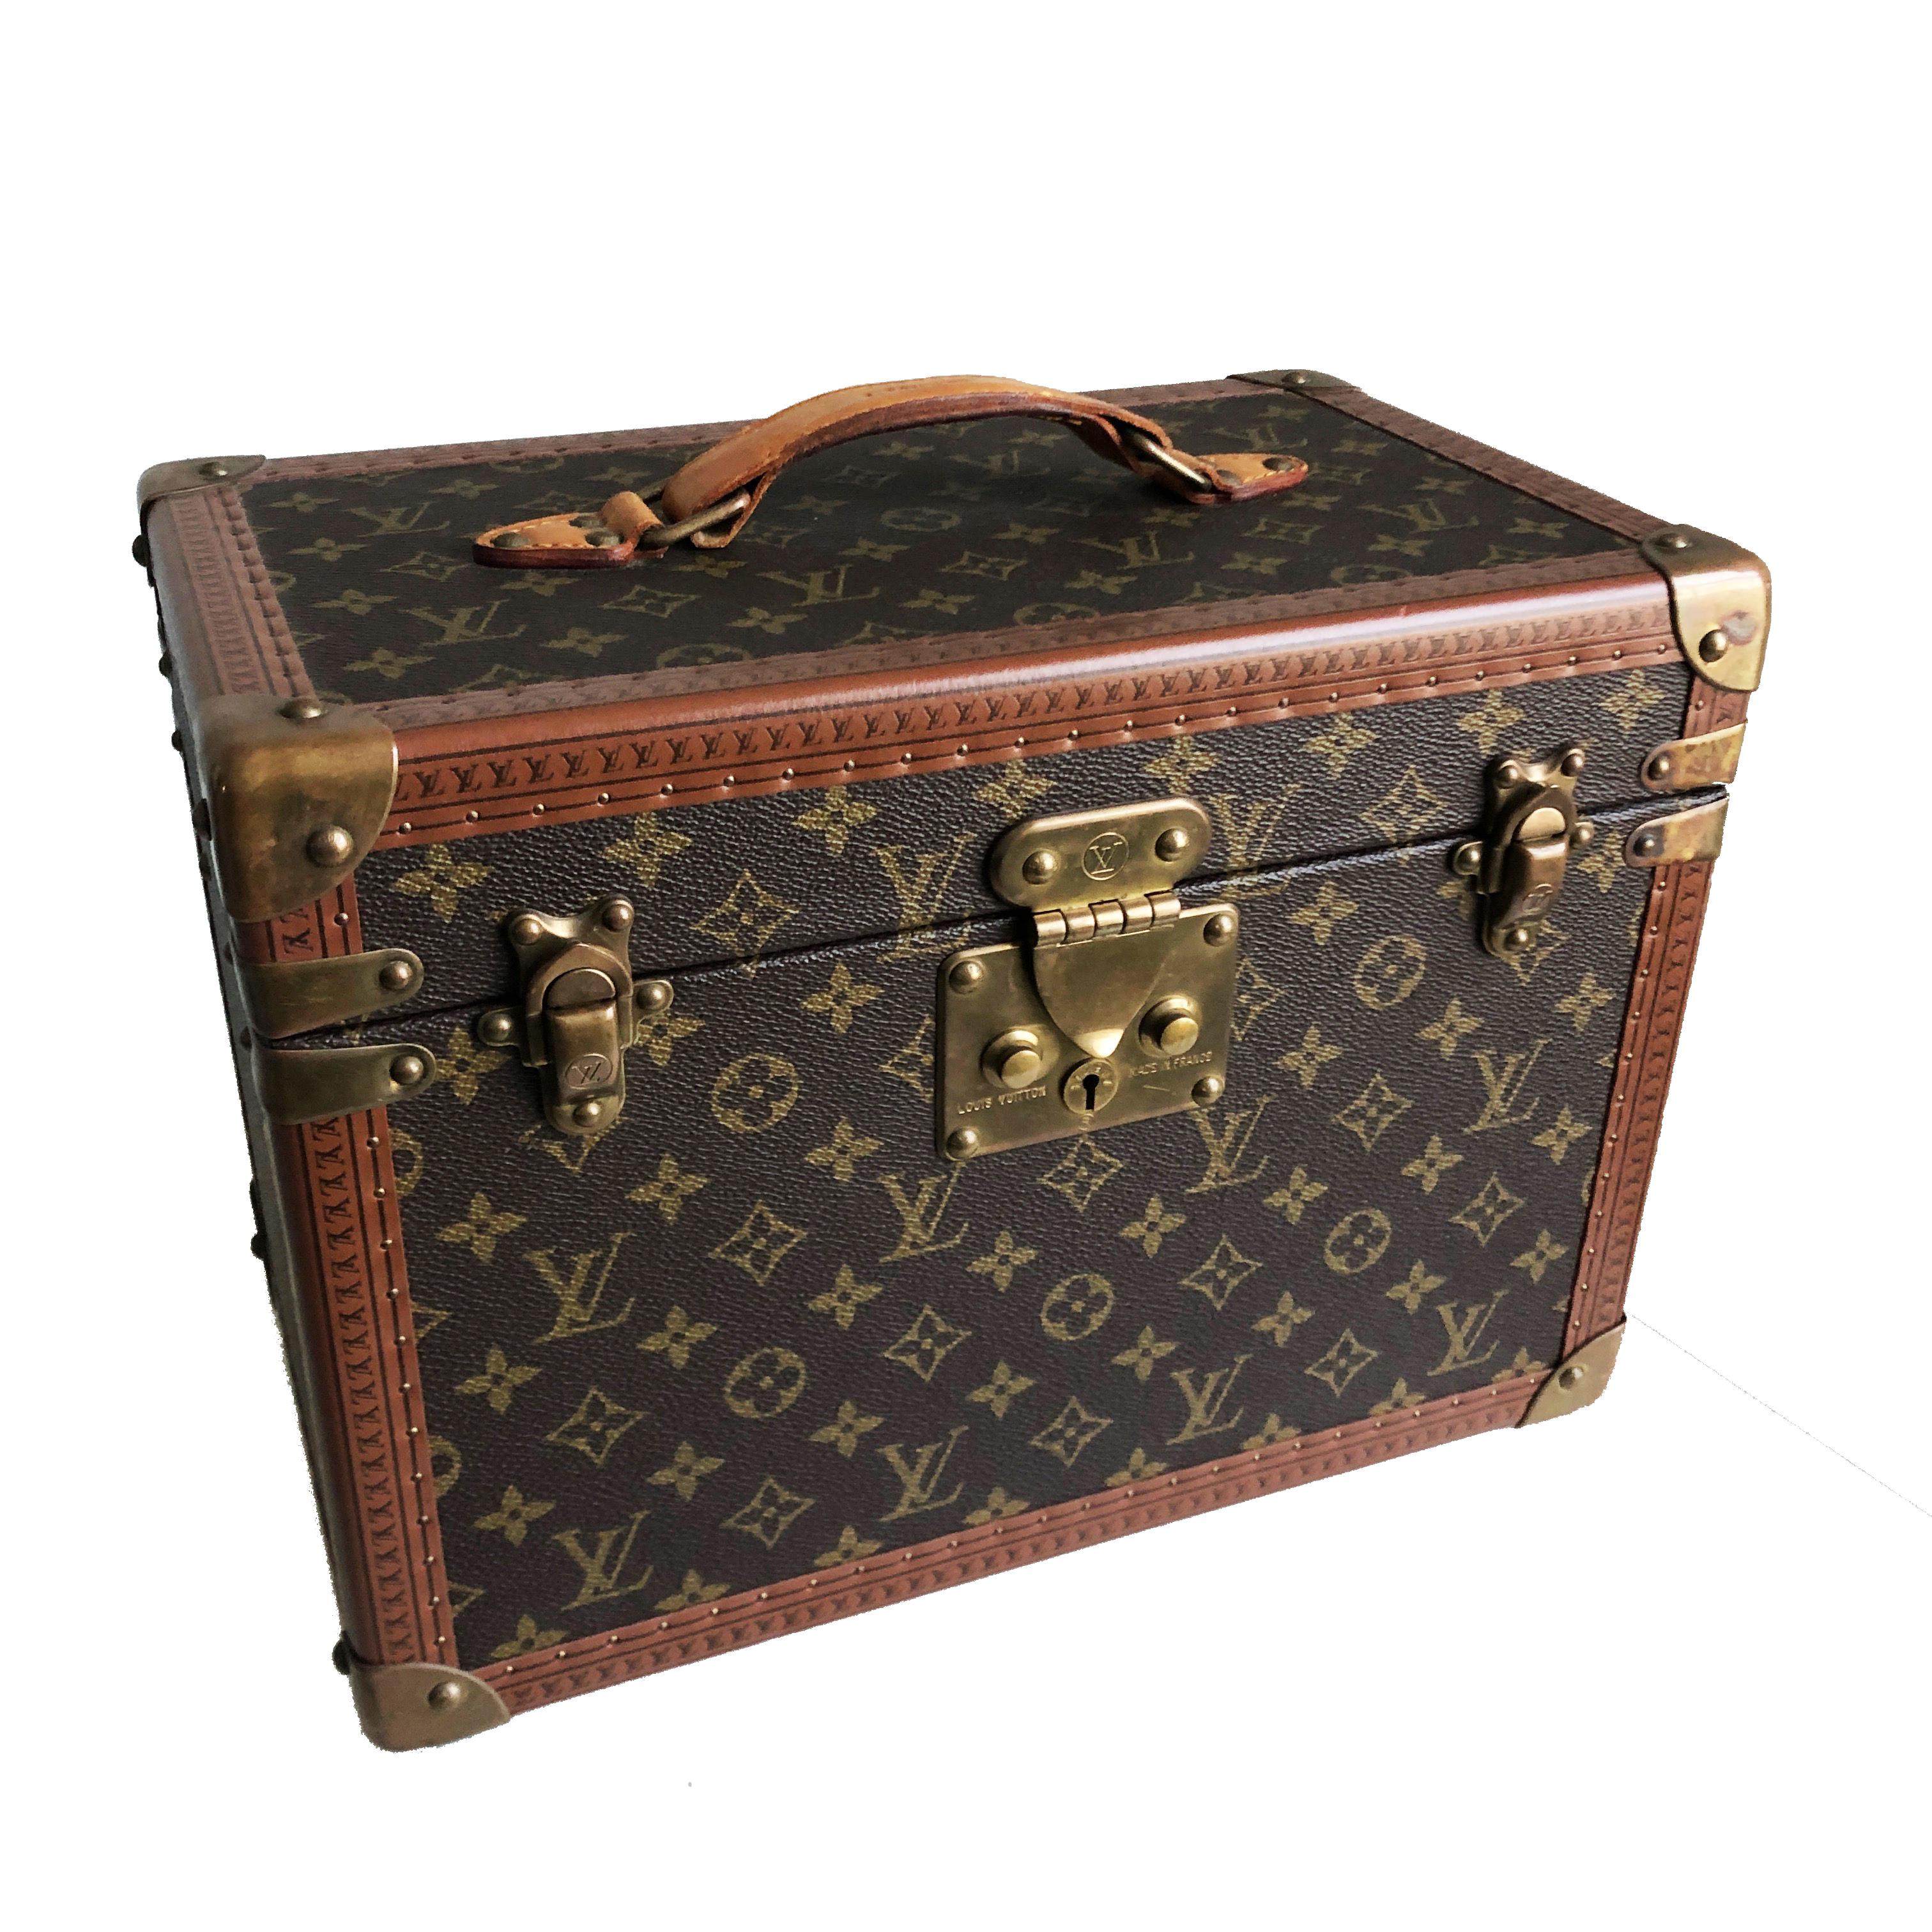 Authentic, preowned, vintage Louis Vuitton Boîte Pharmacie Vanity Train Case. Monogram canvas/lined in Vuittonite fabric w/leather bottle strap & removable mirrored box. Comes with it's original key. Preowned/vintage with signs of prior use/wear: